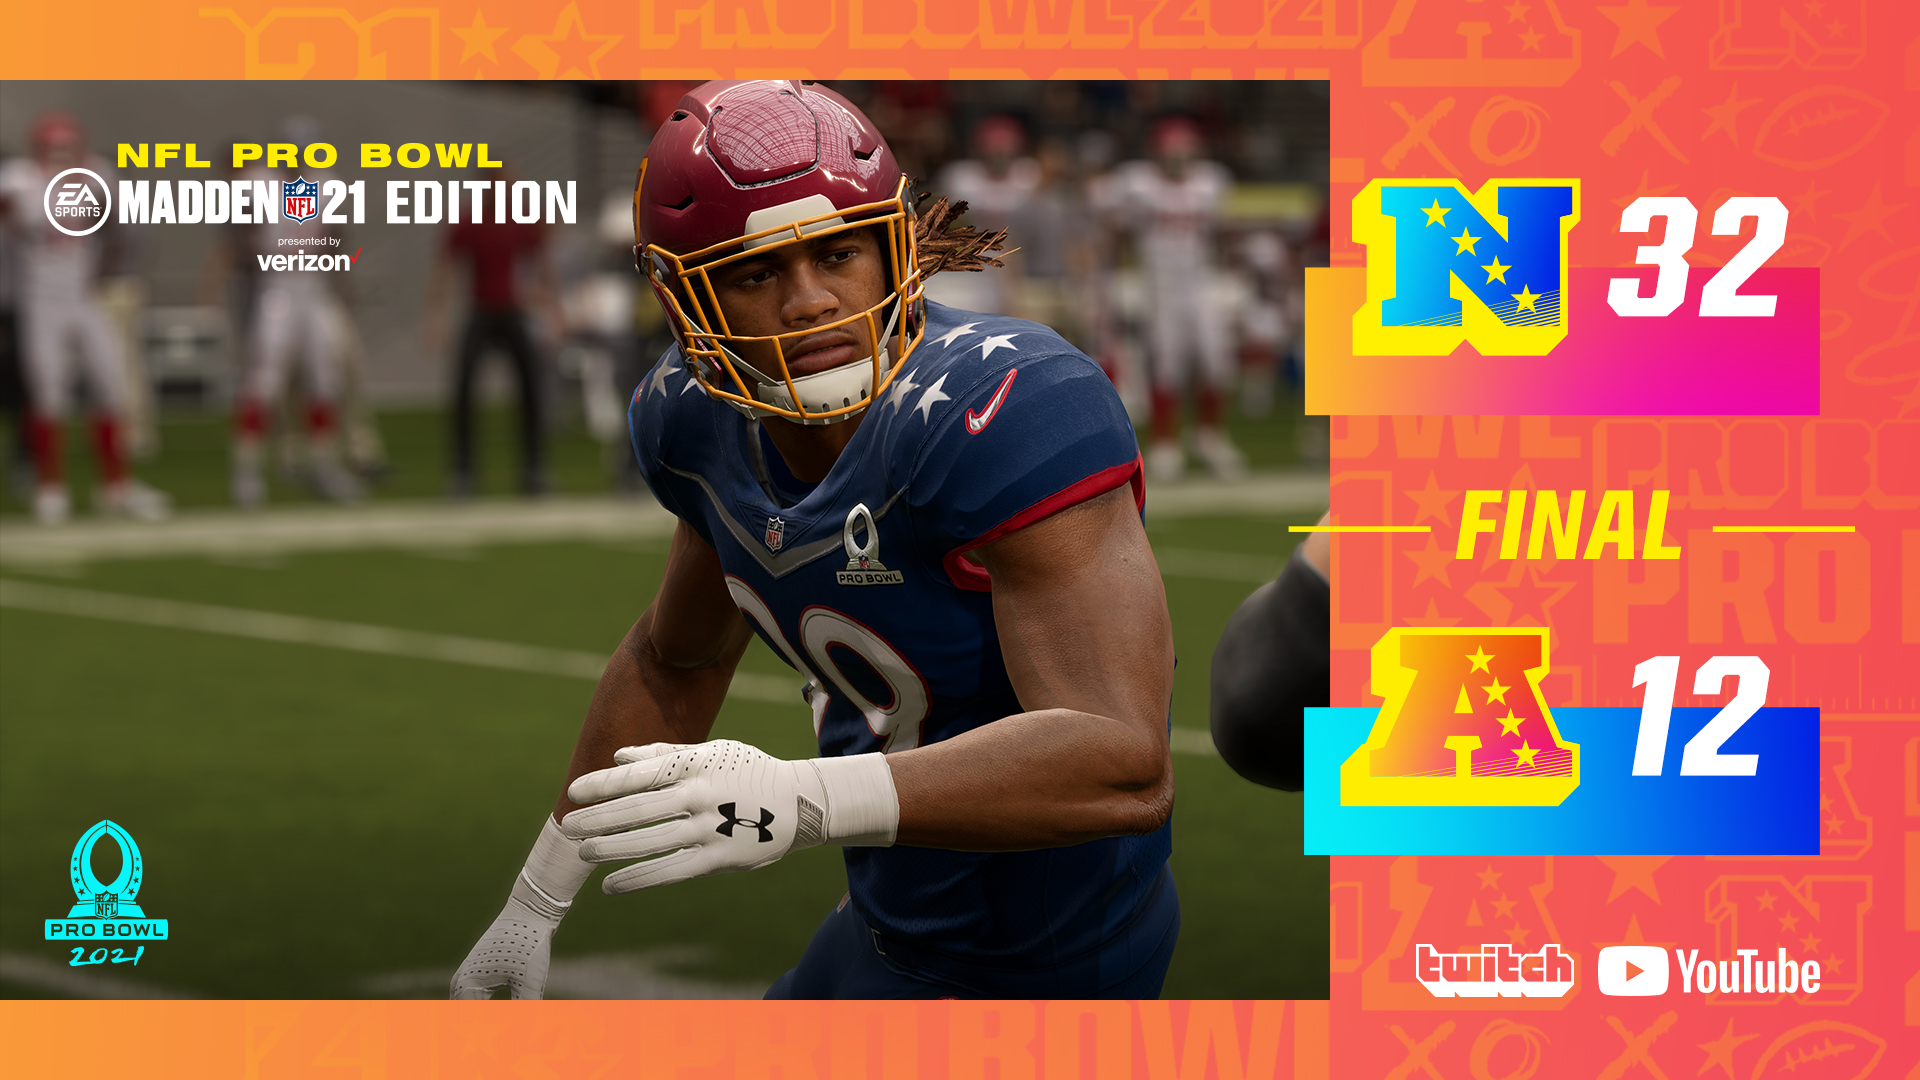 Madden NFL 24 on X: 'Final score from the #ProBowl: Madden NFL 21 Edition  